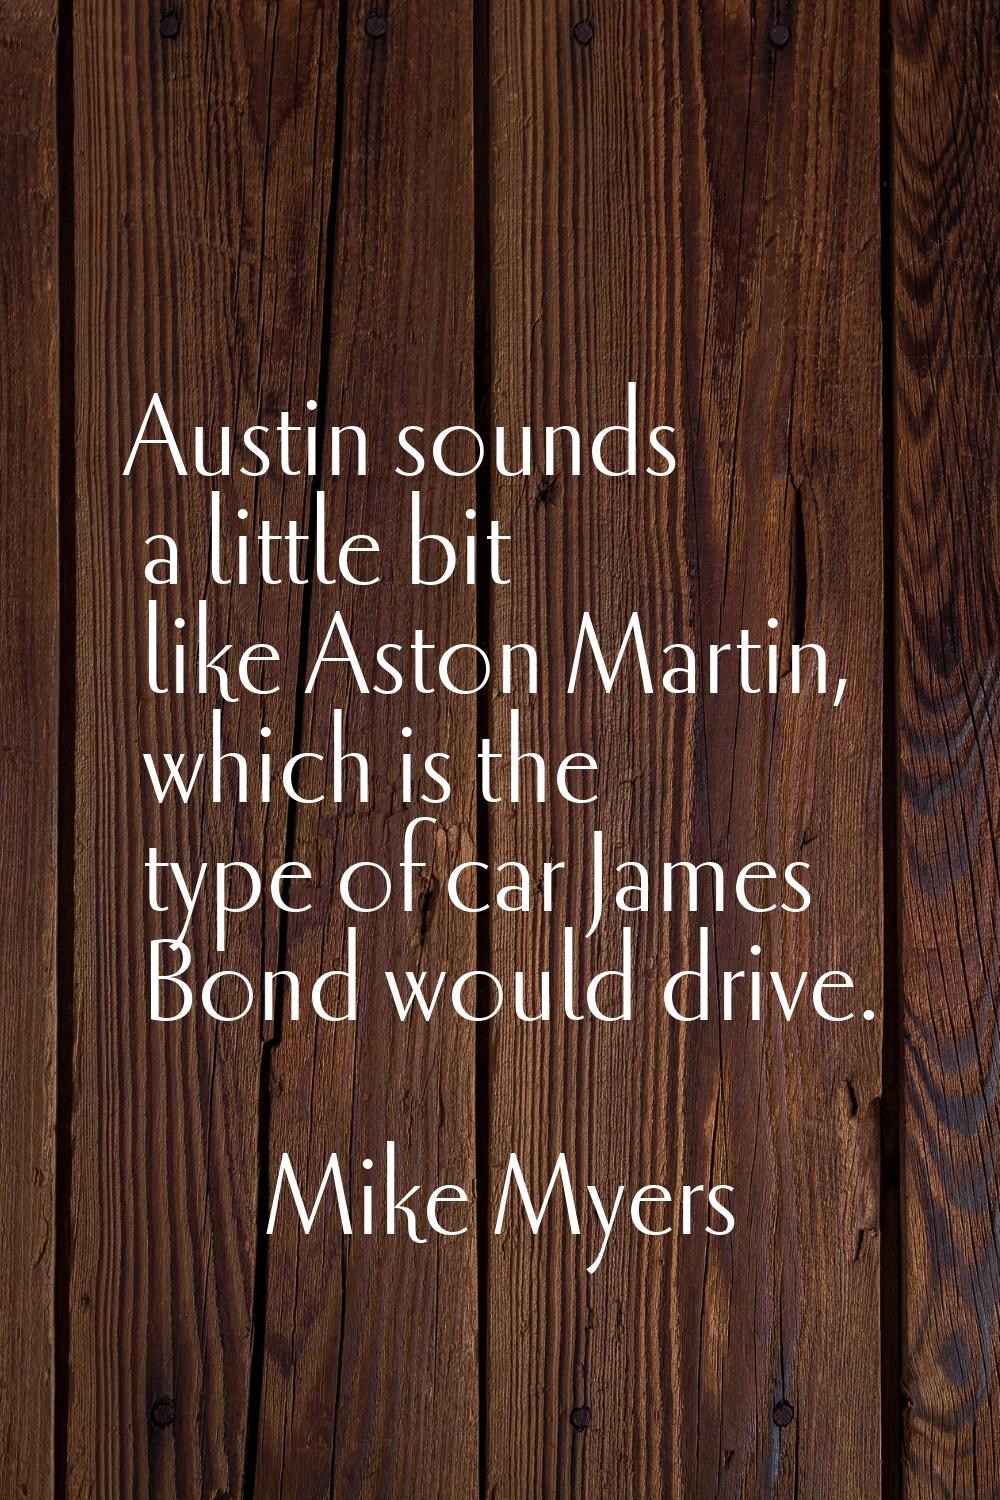 Austin sounds a little bit like Aston Martin, which is the type of car James Bond would drive.